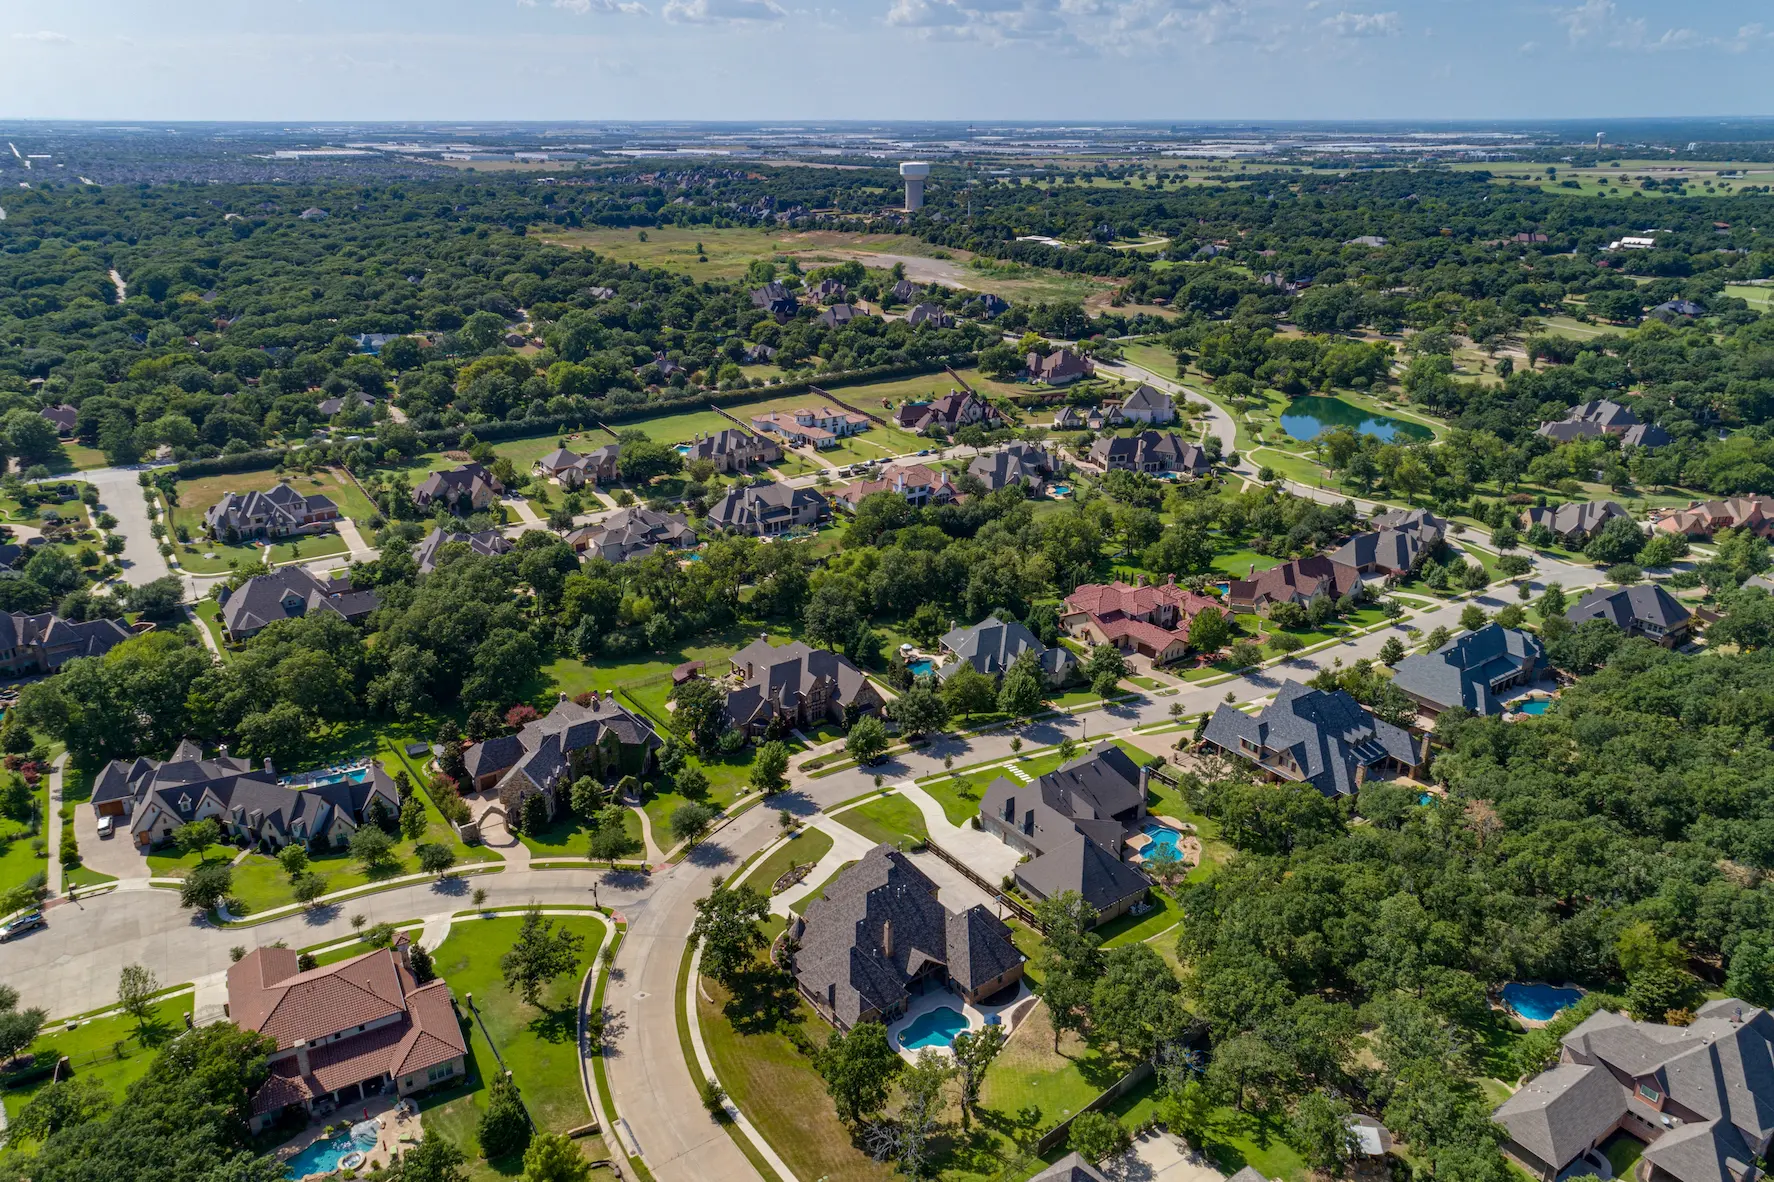 Colleyville, TX Real Estate, Homes & Condos For Sale